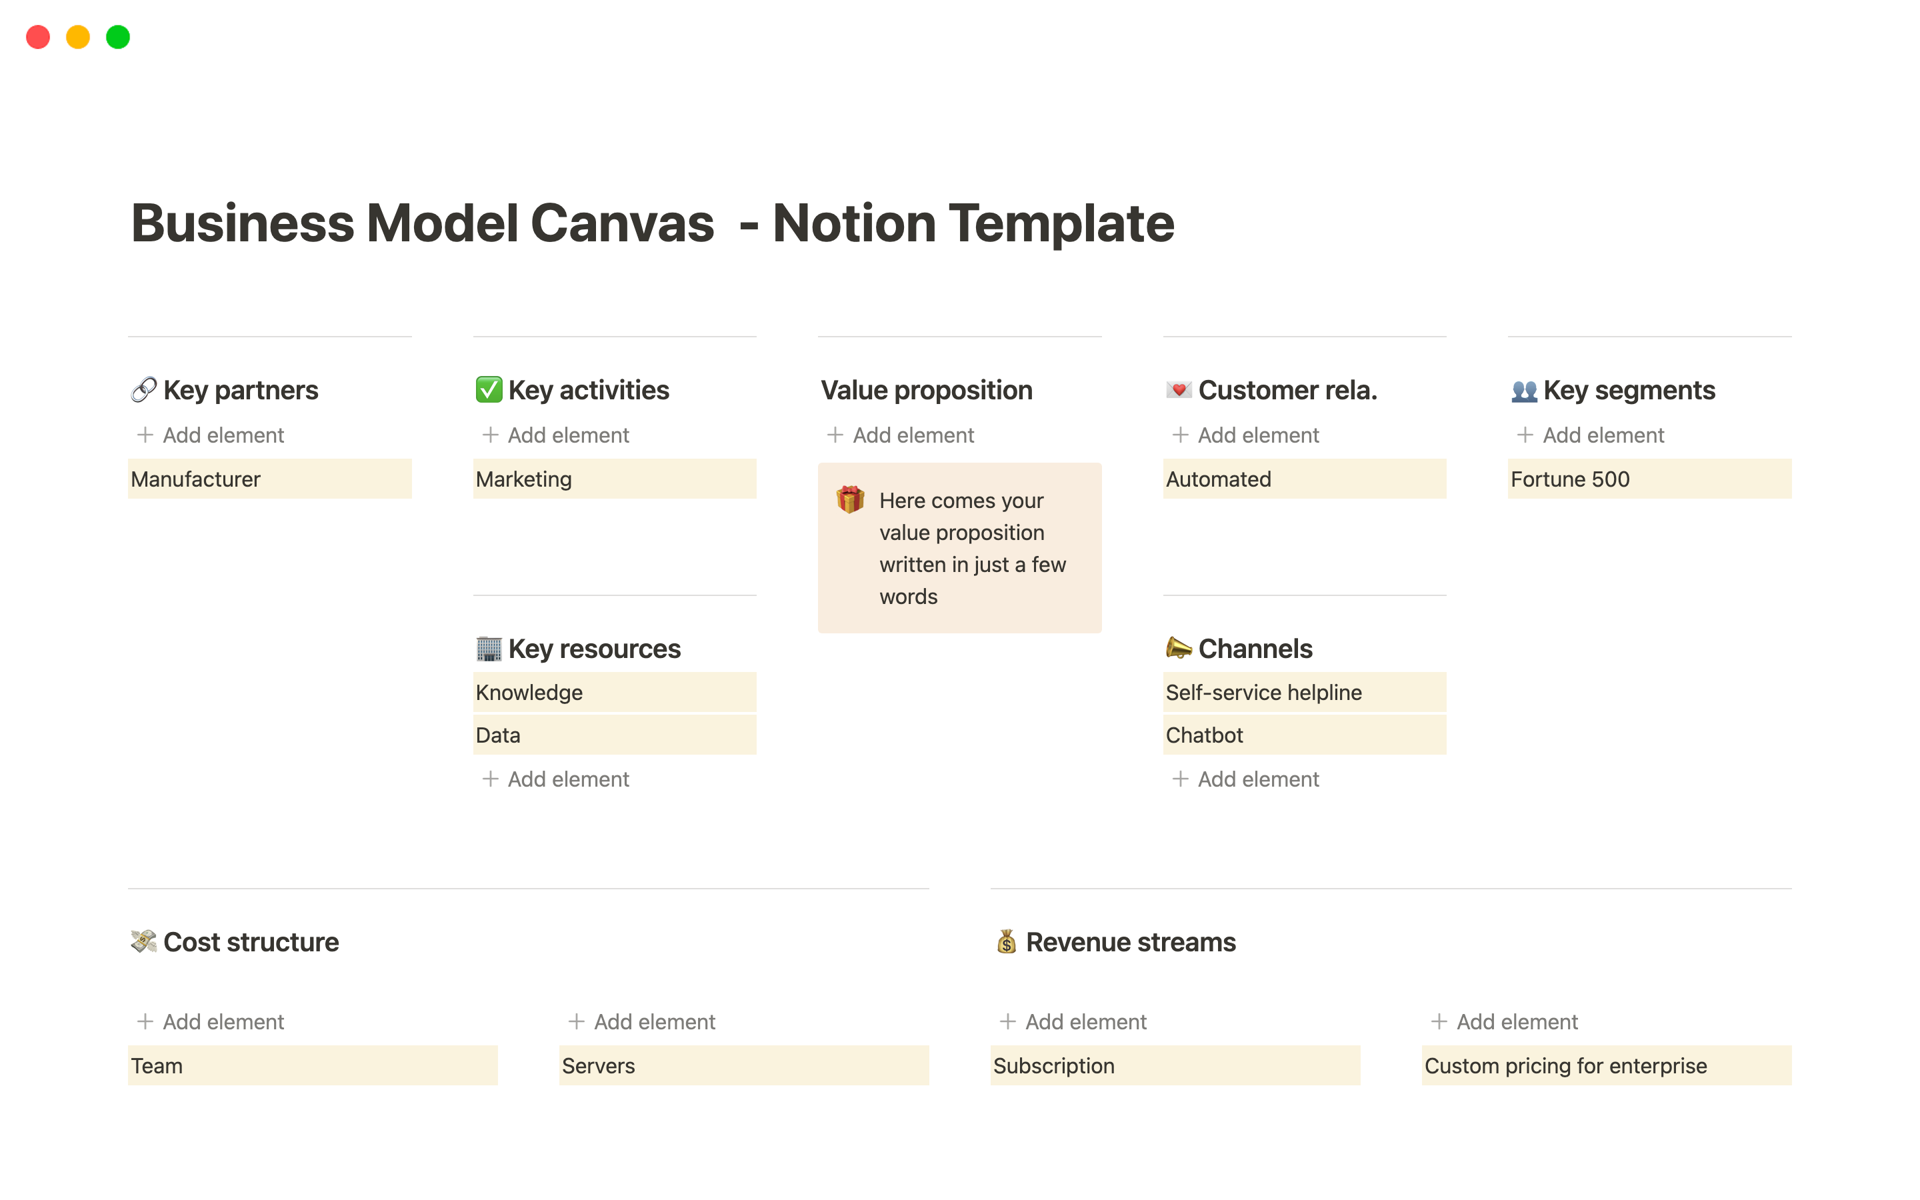 Create, share and export your Business Model Canvas directly within the Notion app.